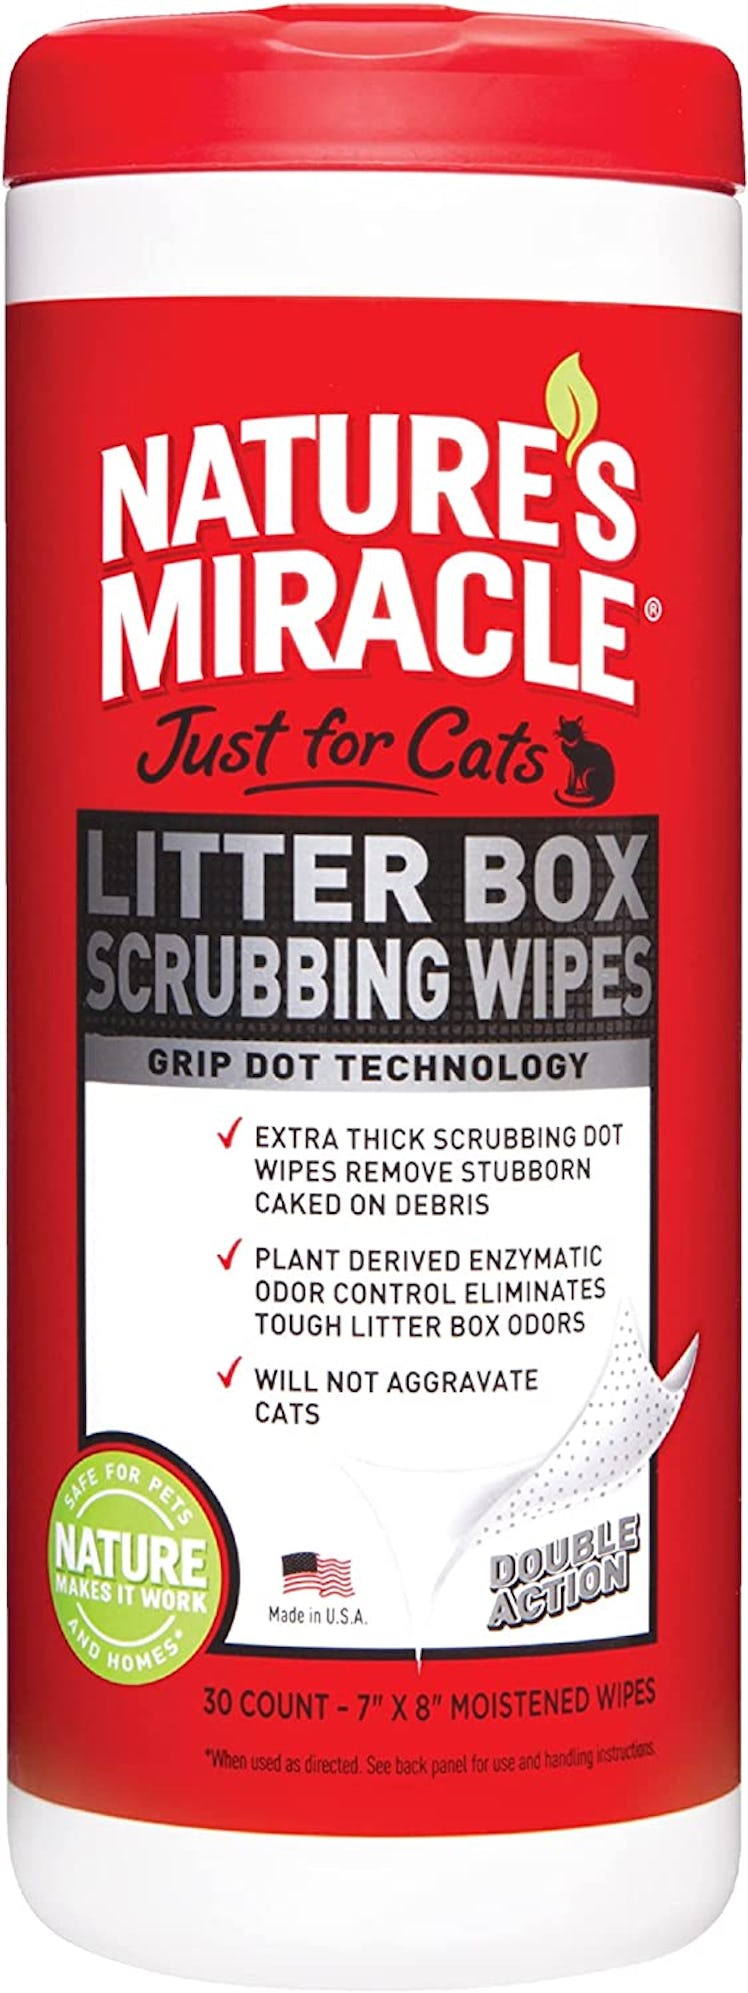 Nature's Miracle Cat Litter Box Scrubbing Wipes (30 Count)